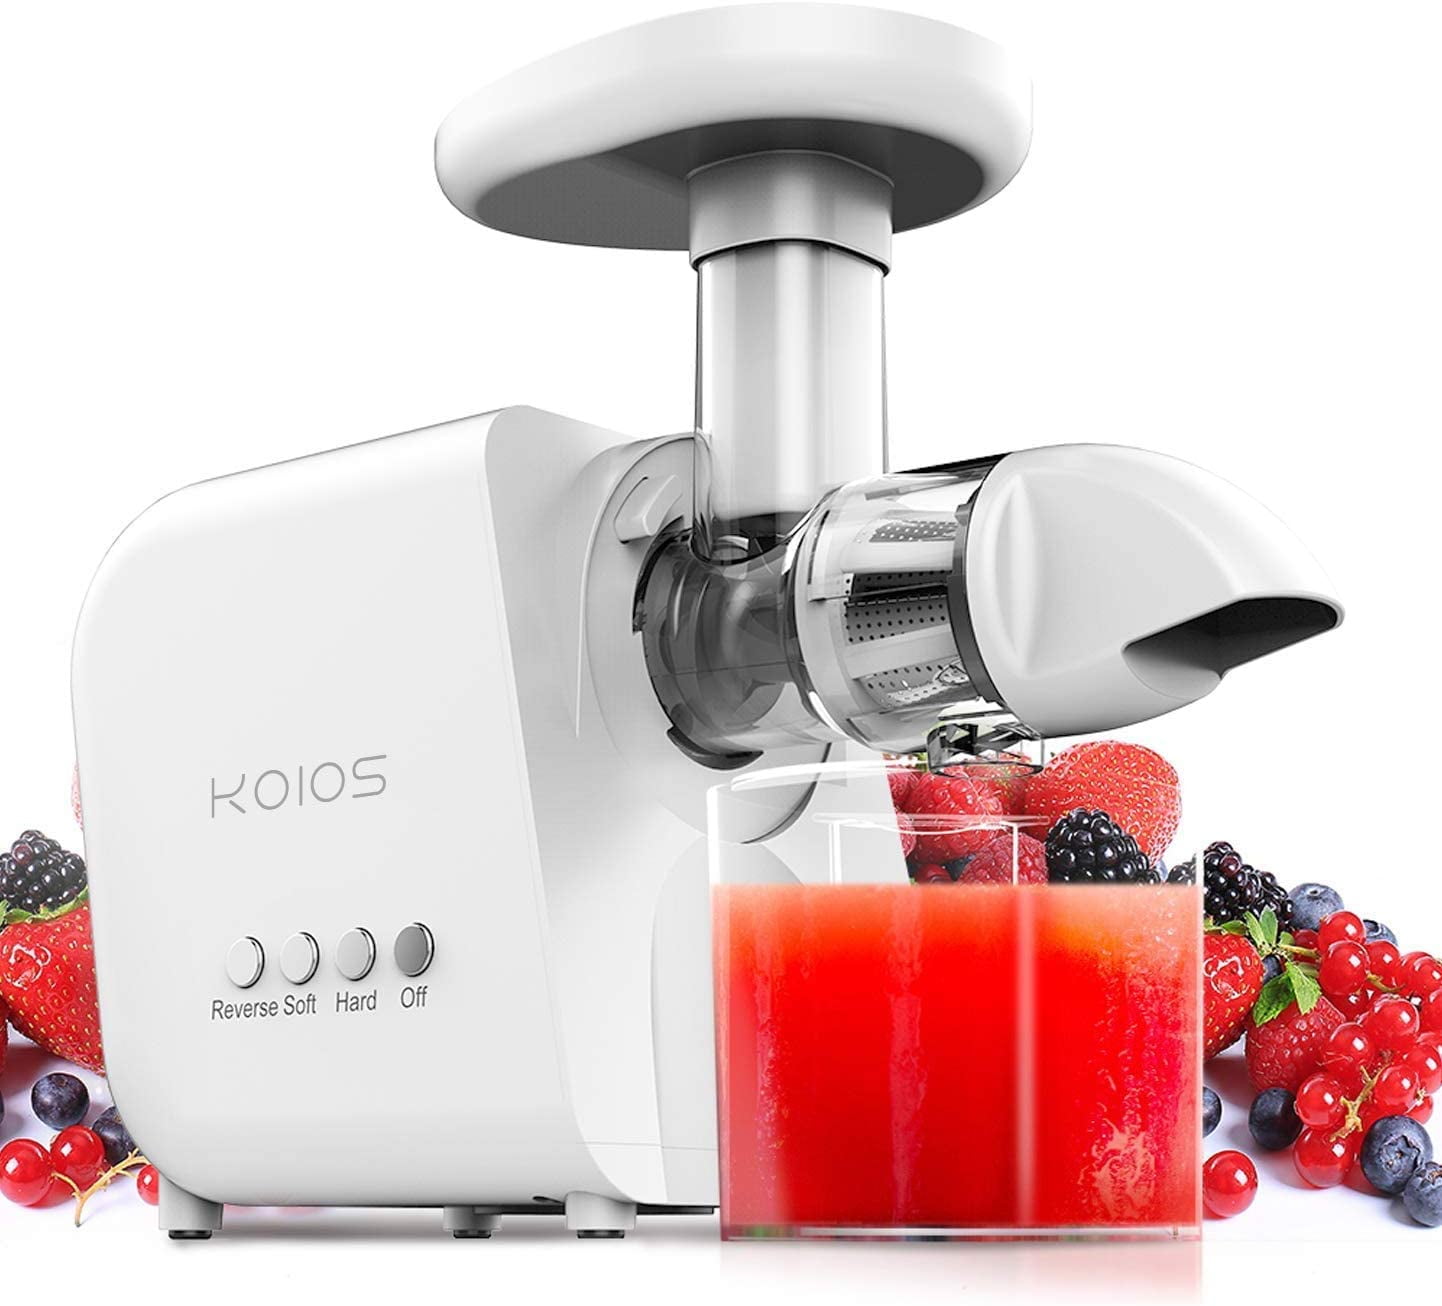 KOIOS Juicer Juice Jug and Brush for High Nutrient Fruit and Vegetable Juice Cold Press Juicer Machine with Quiet Motor Slow Masticating Juicer Extractor with Reverse Function 